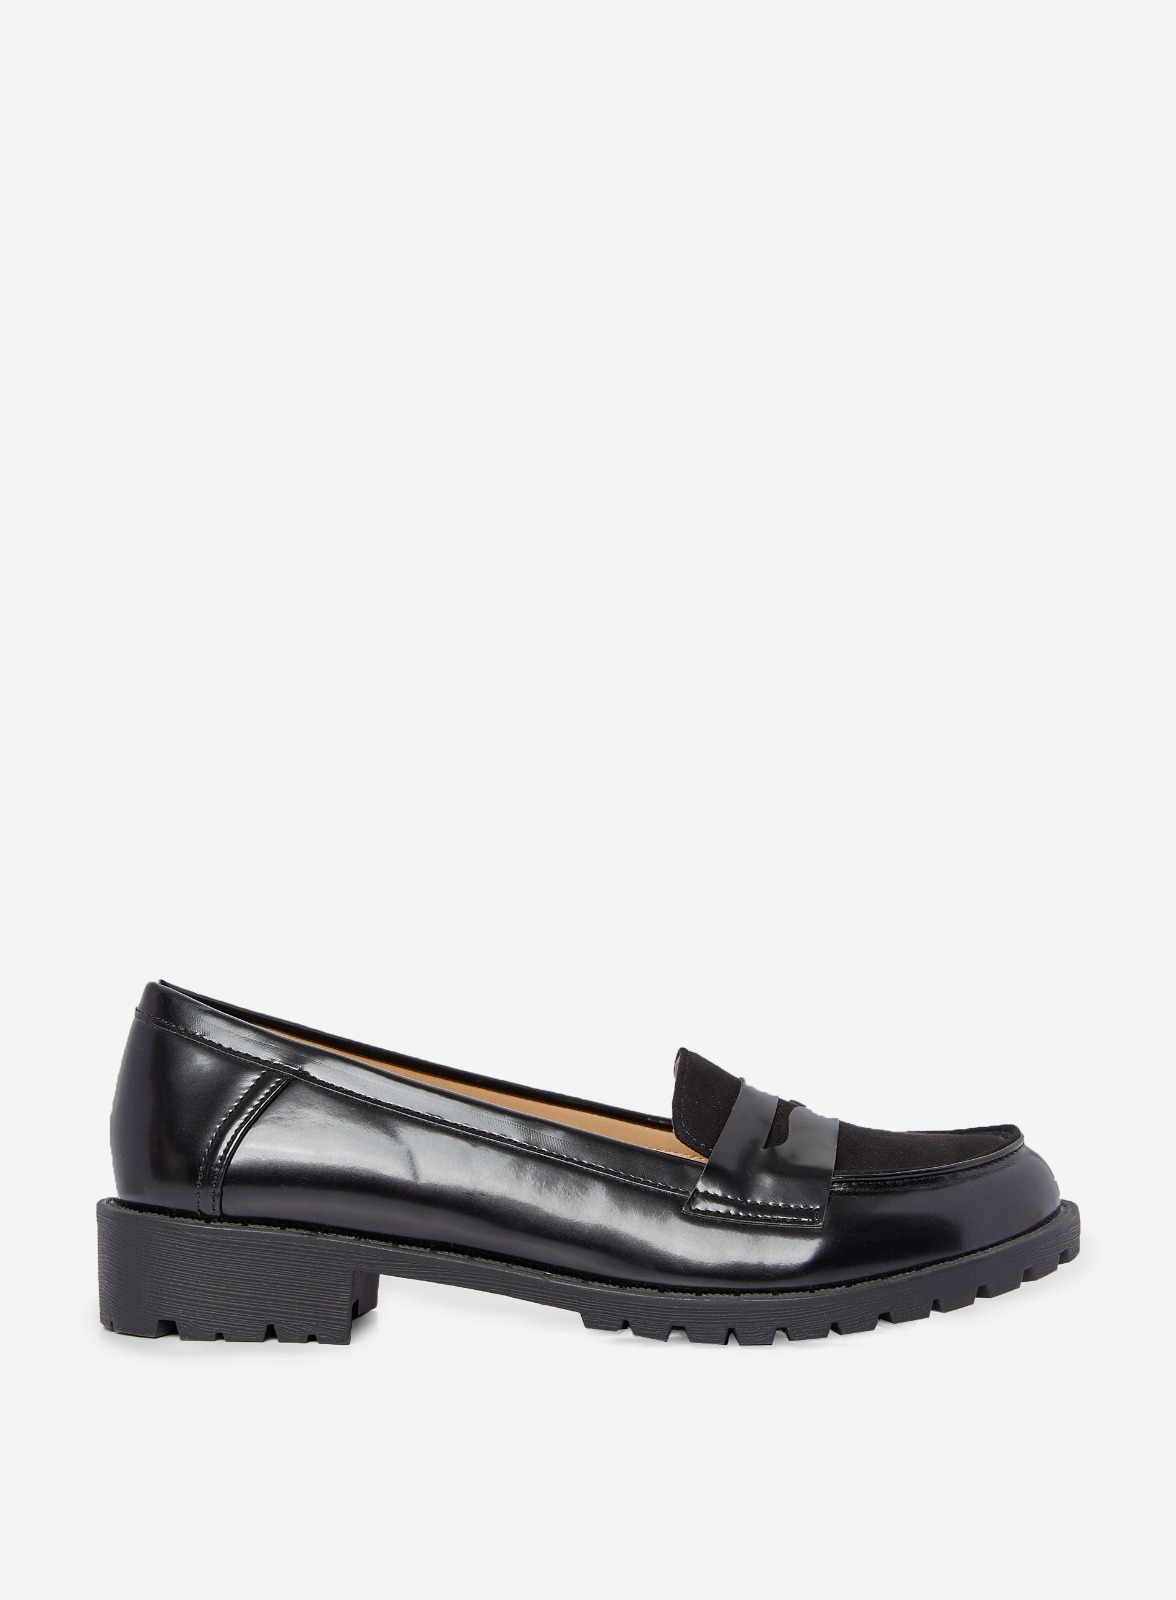 dorothy perkins womens loafers